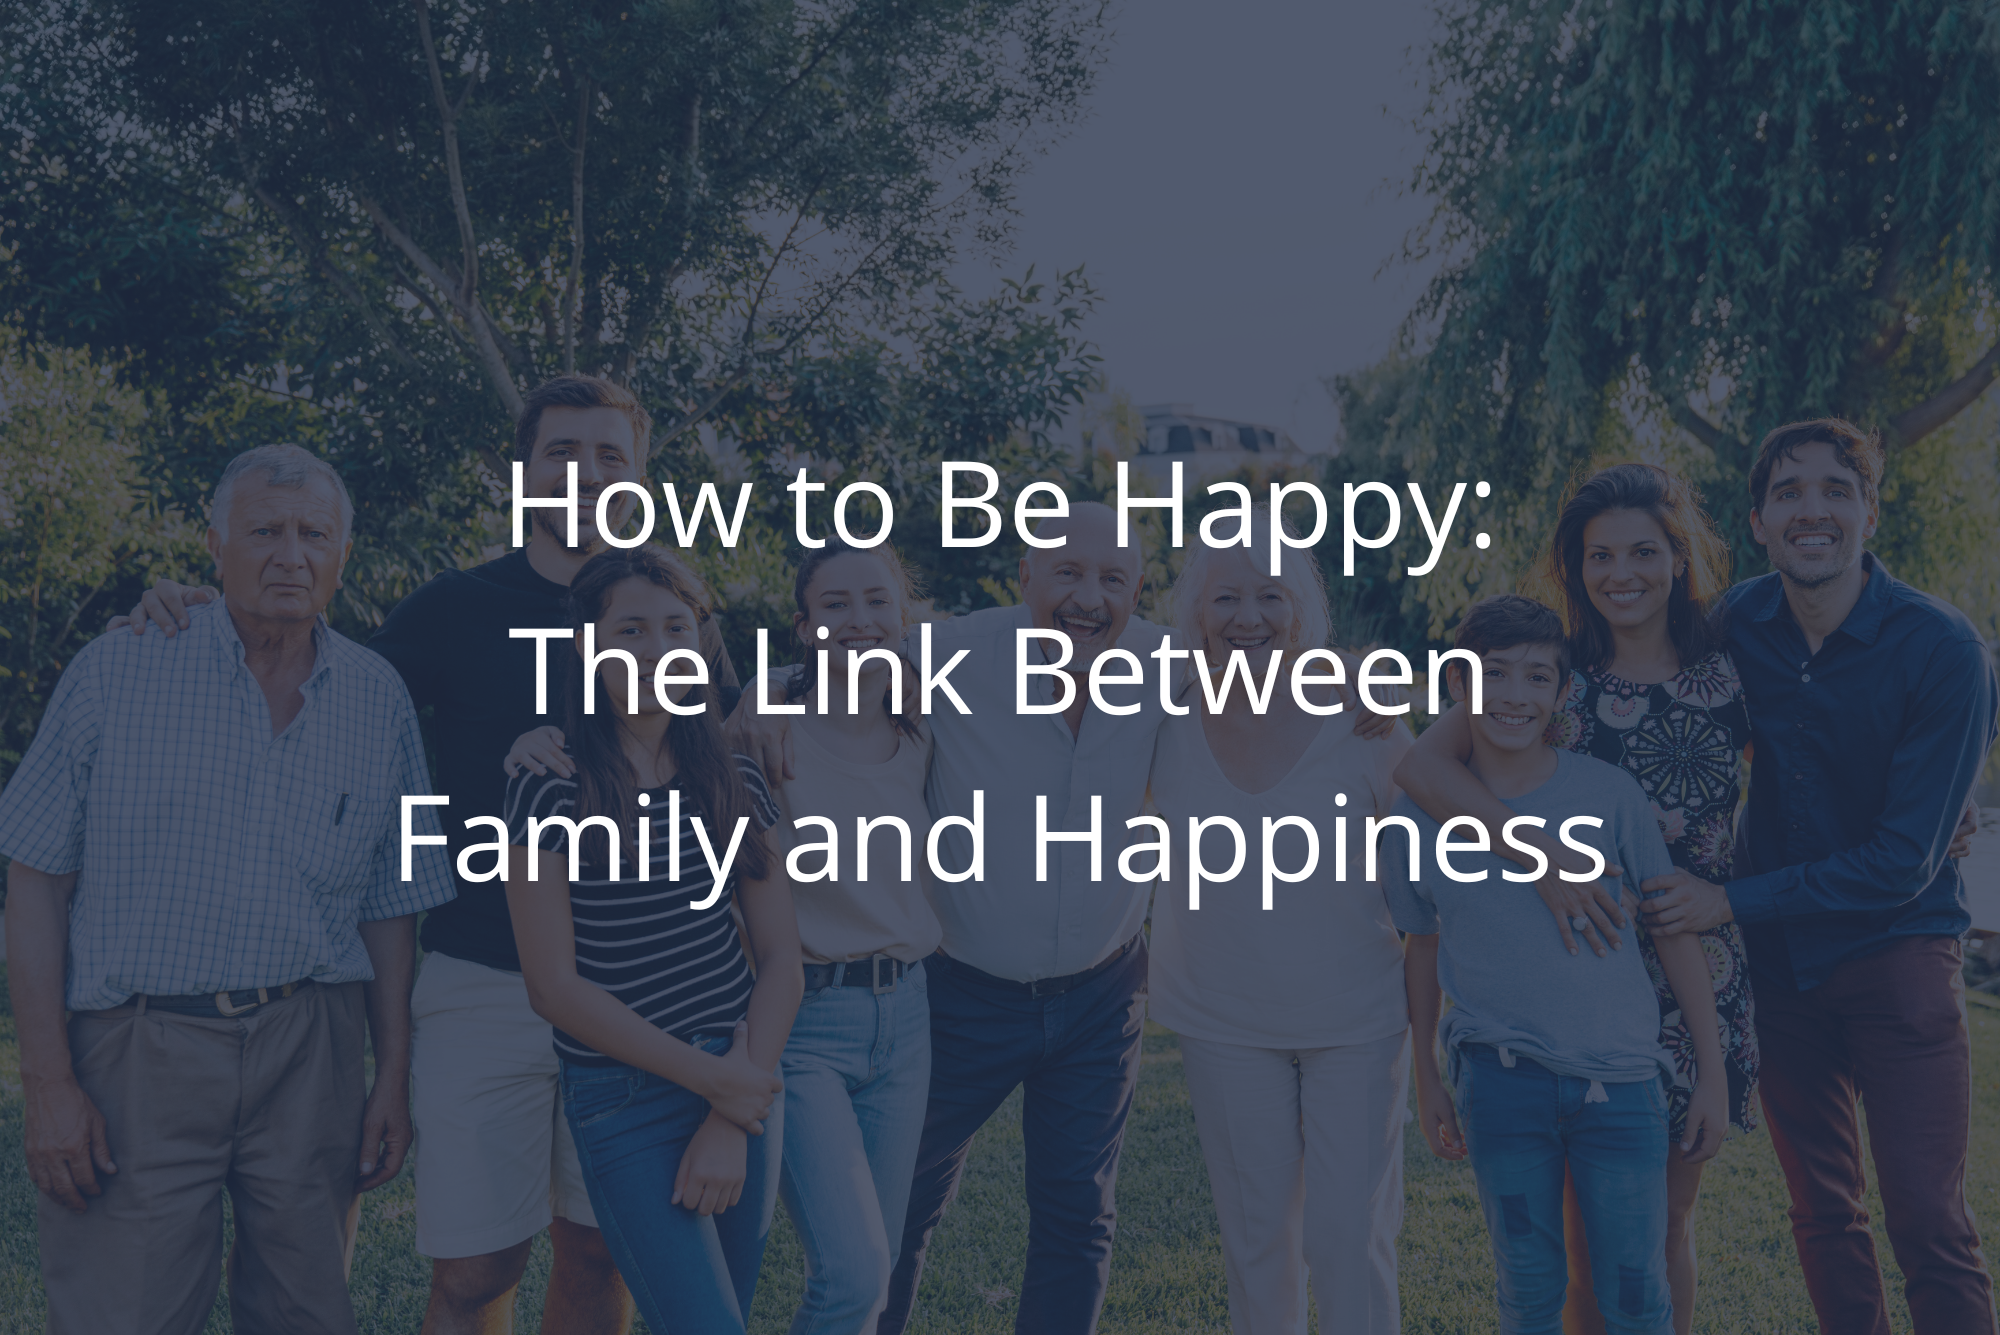 Multiple members of an extended family smile together in a family portrait because being with family gives them happiness.